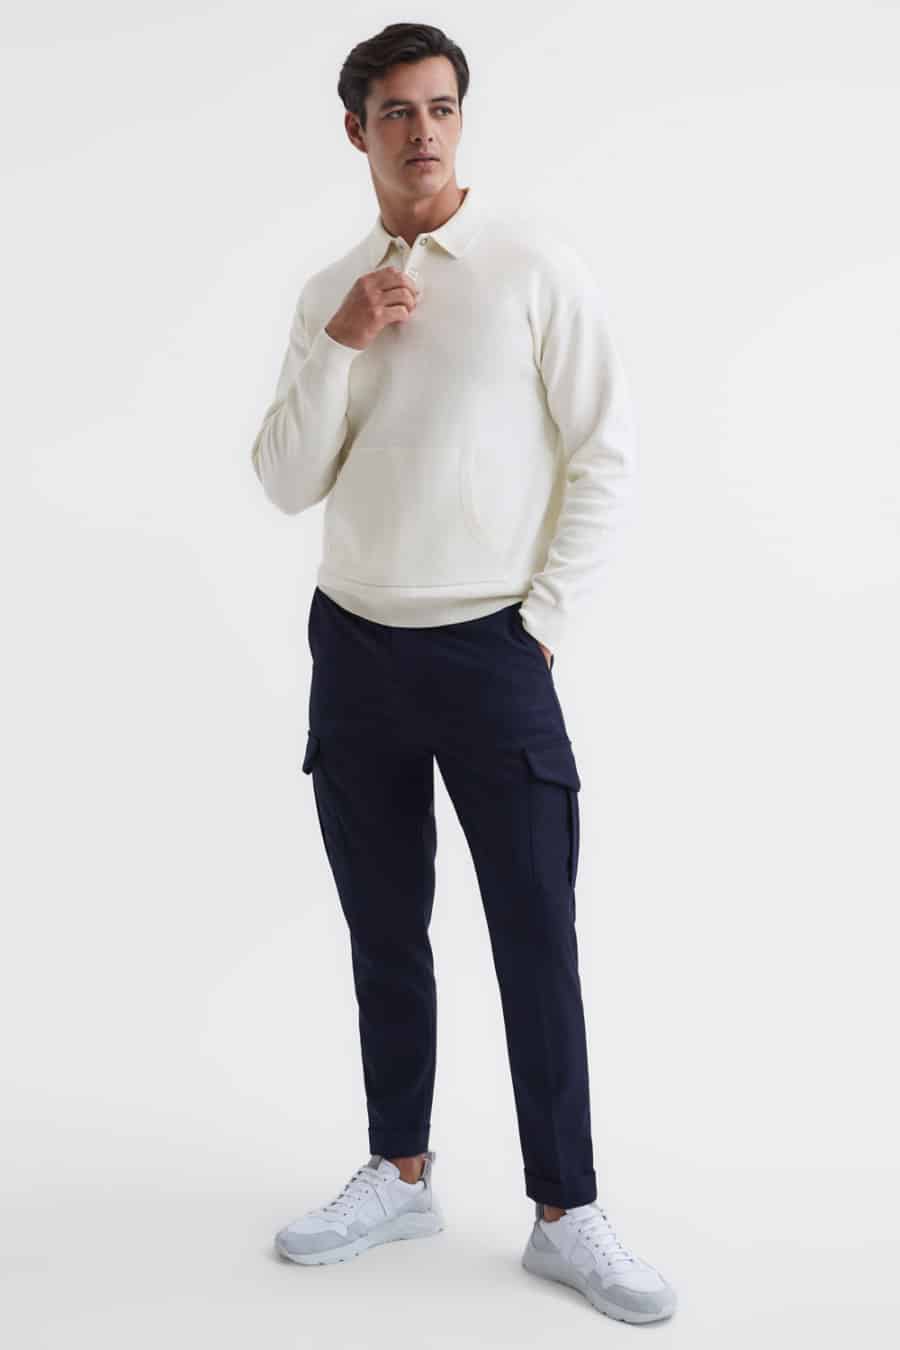 Men's navy cargo pants, white long sleeve polo shirt and white sneakers outfit